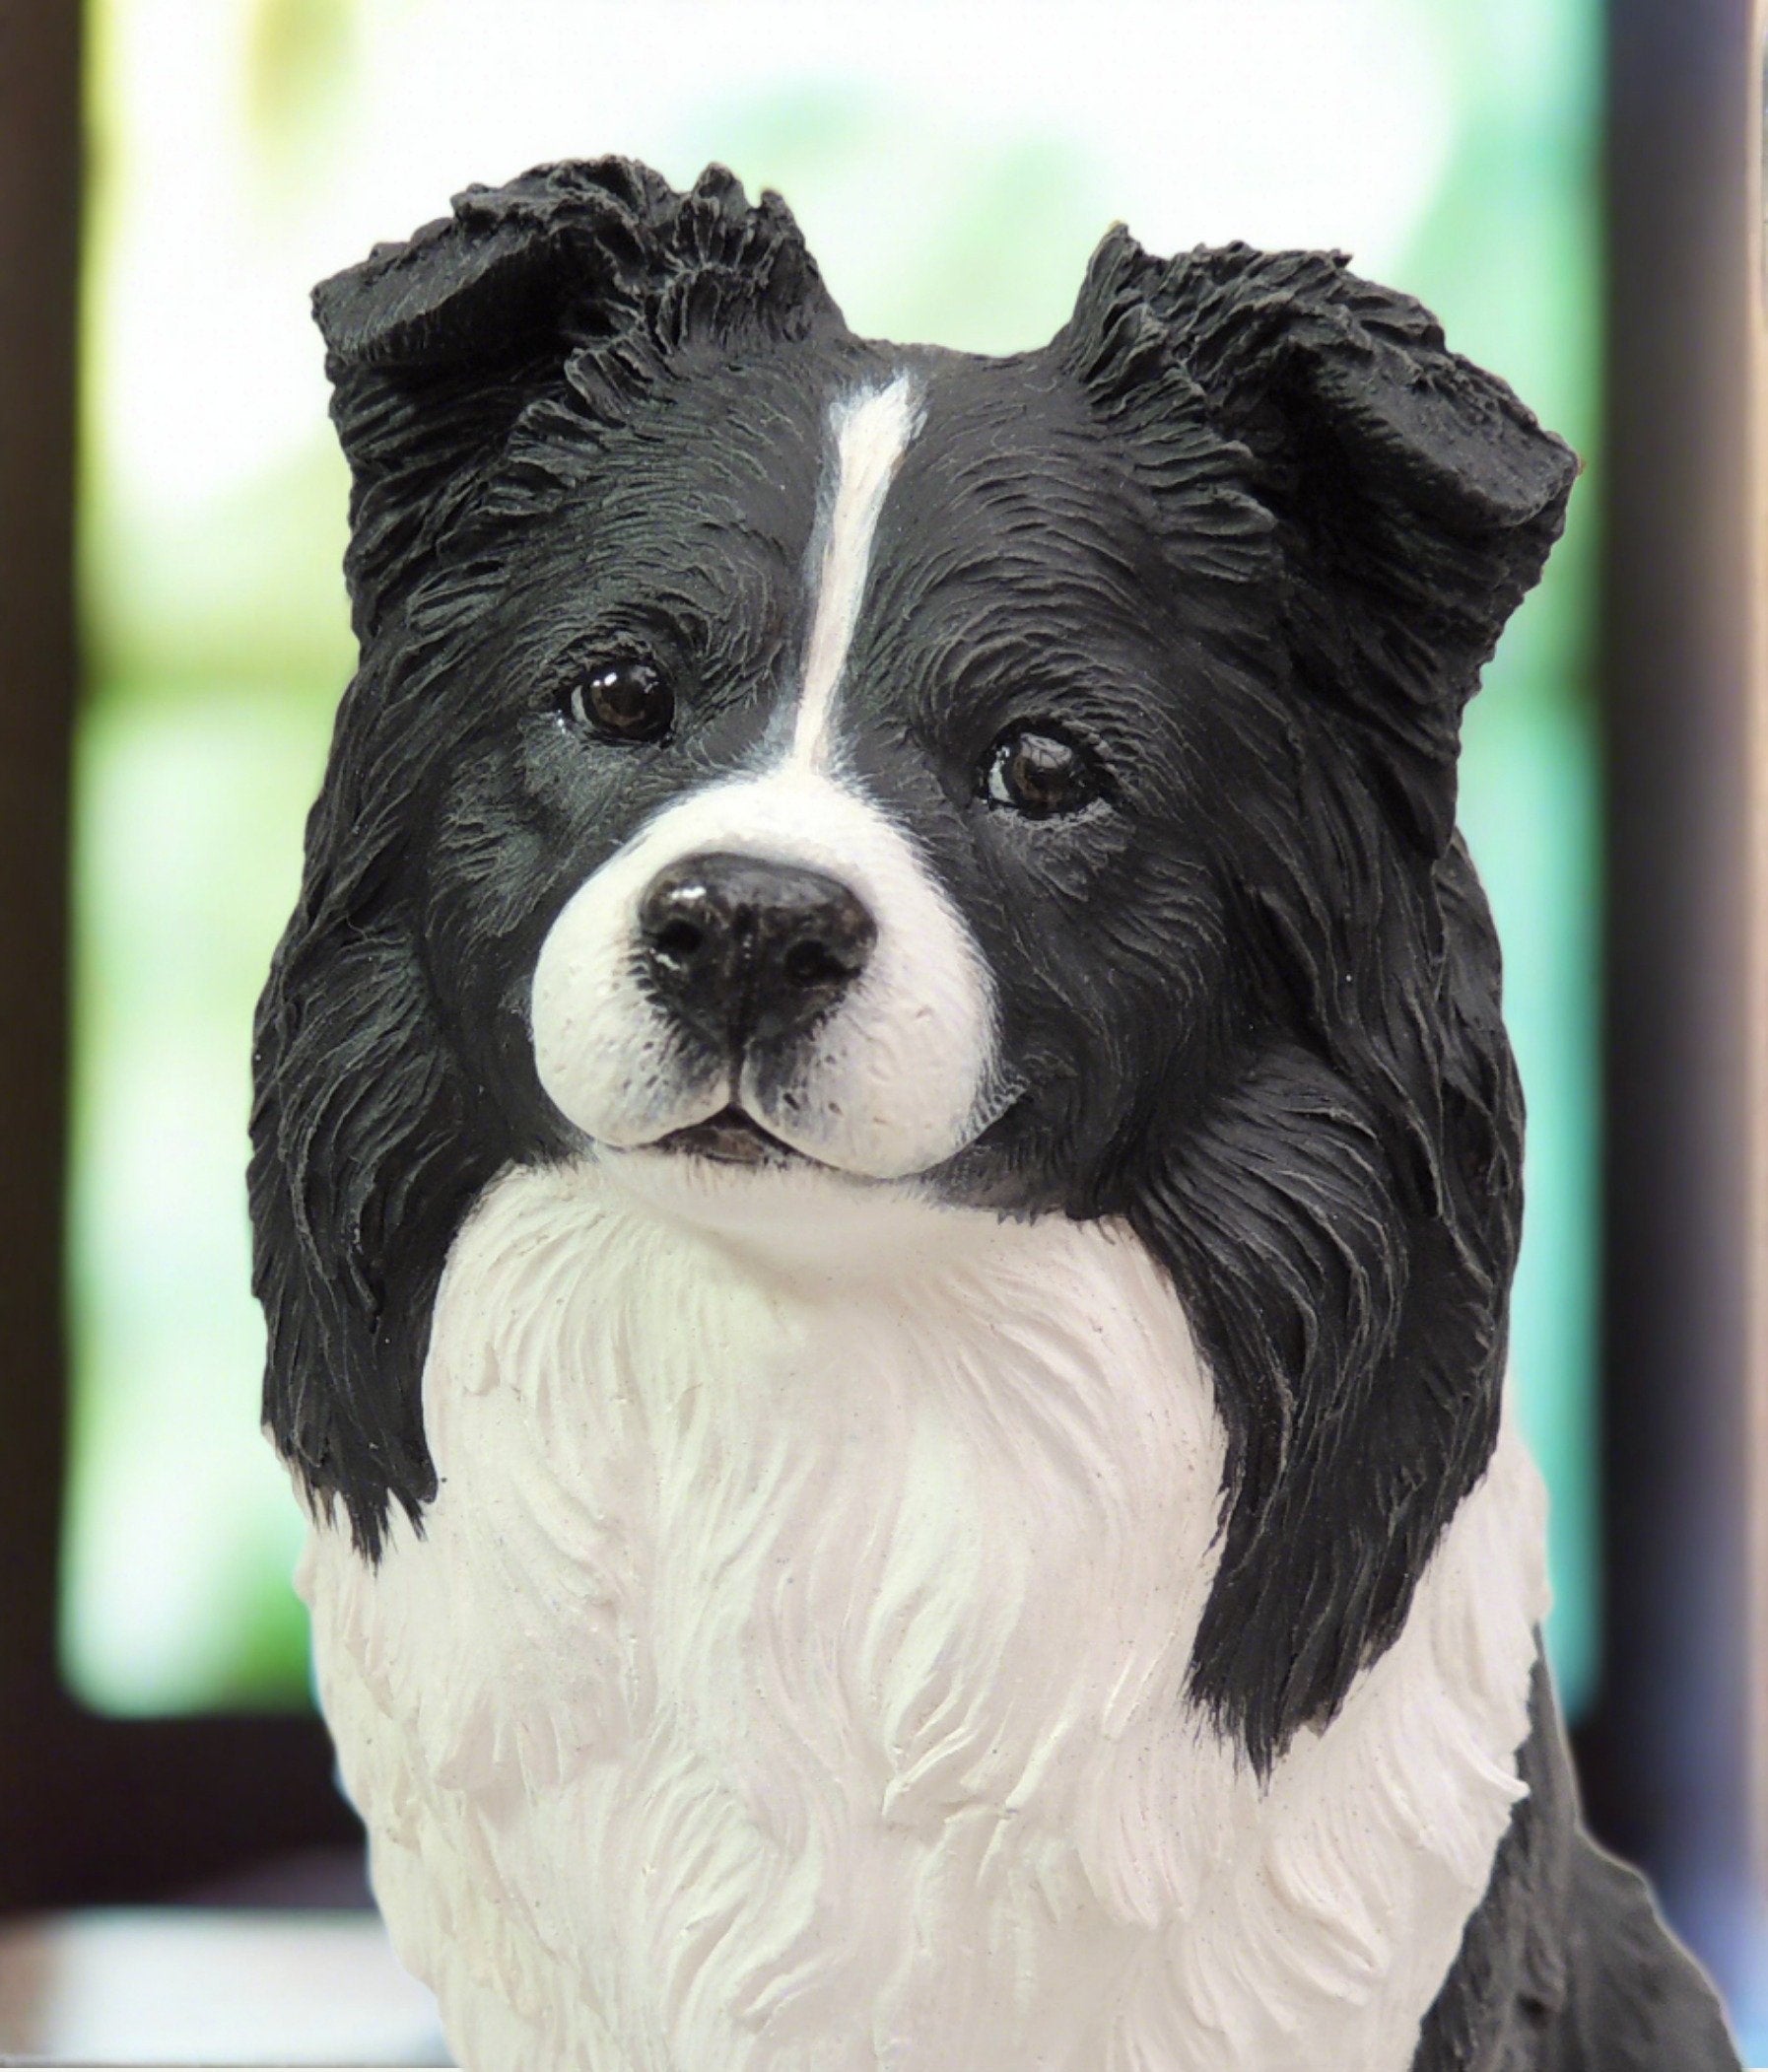 Sculpture of a black and white border collie